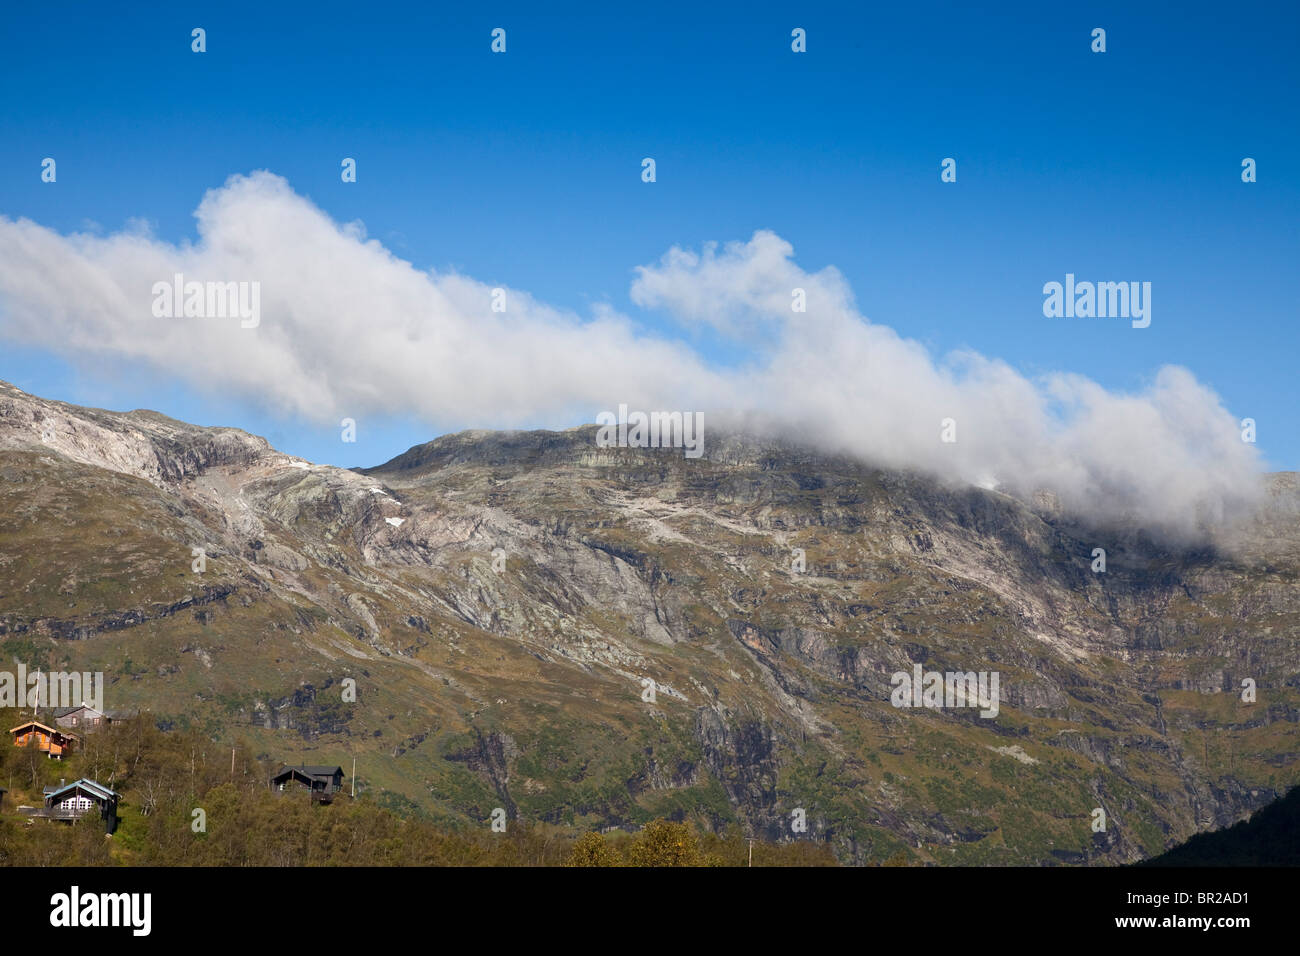 Mountain valley landscape view from the Flåm famous tourist railway line in Norway. Stock Photo